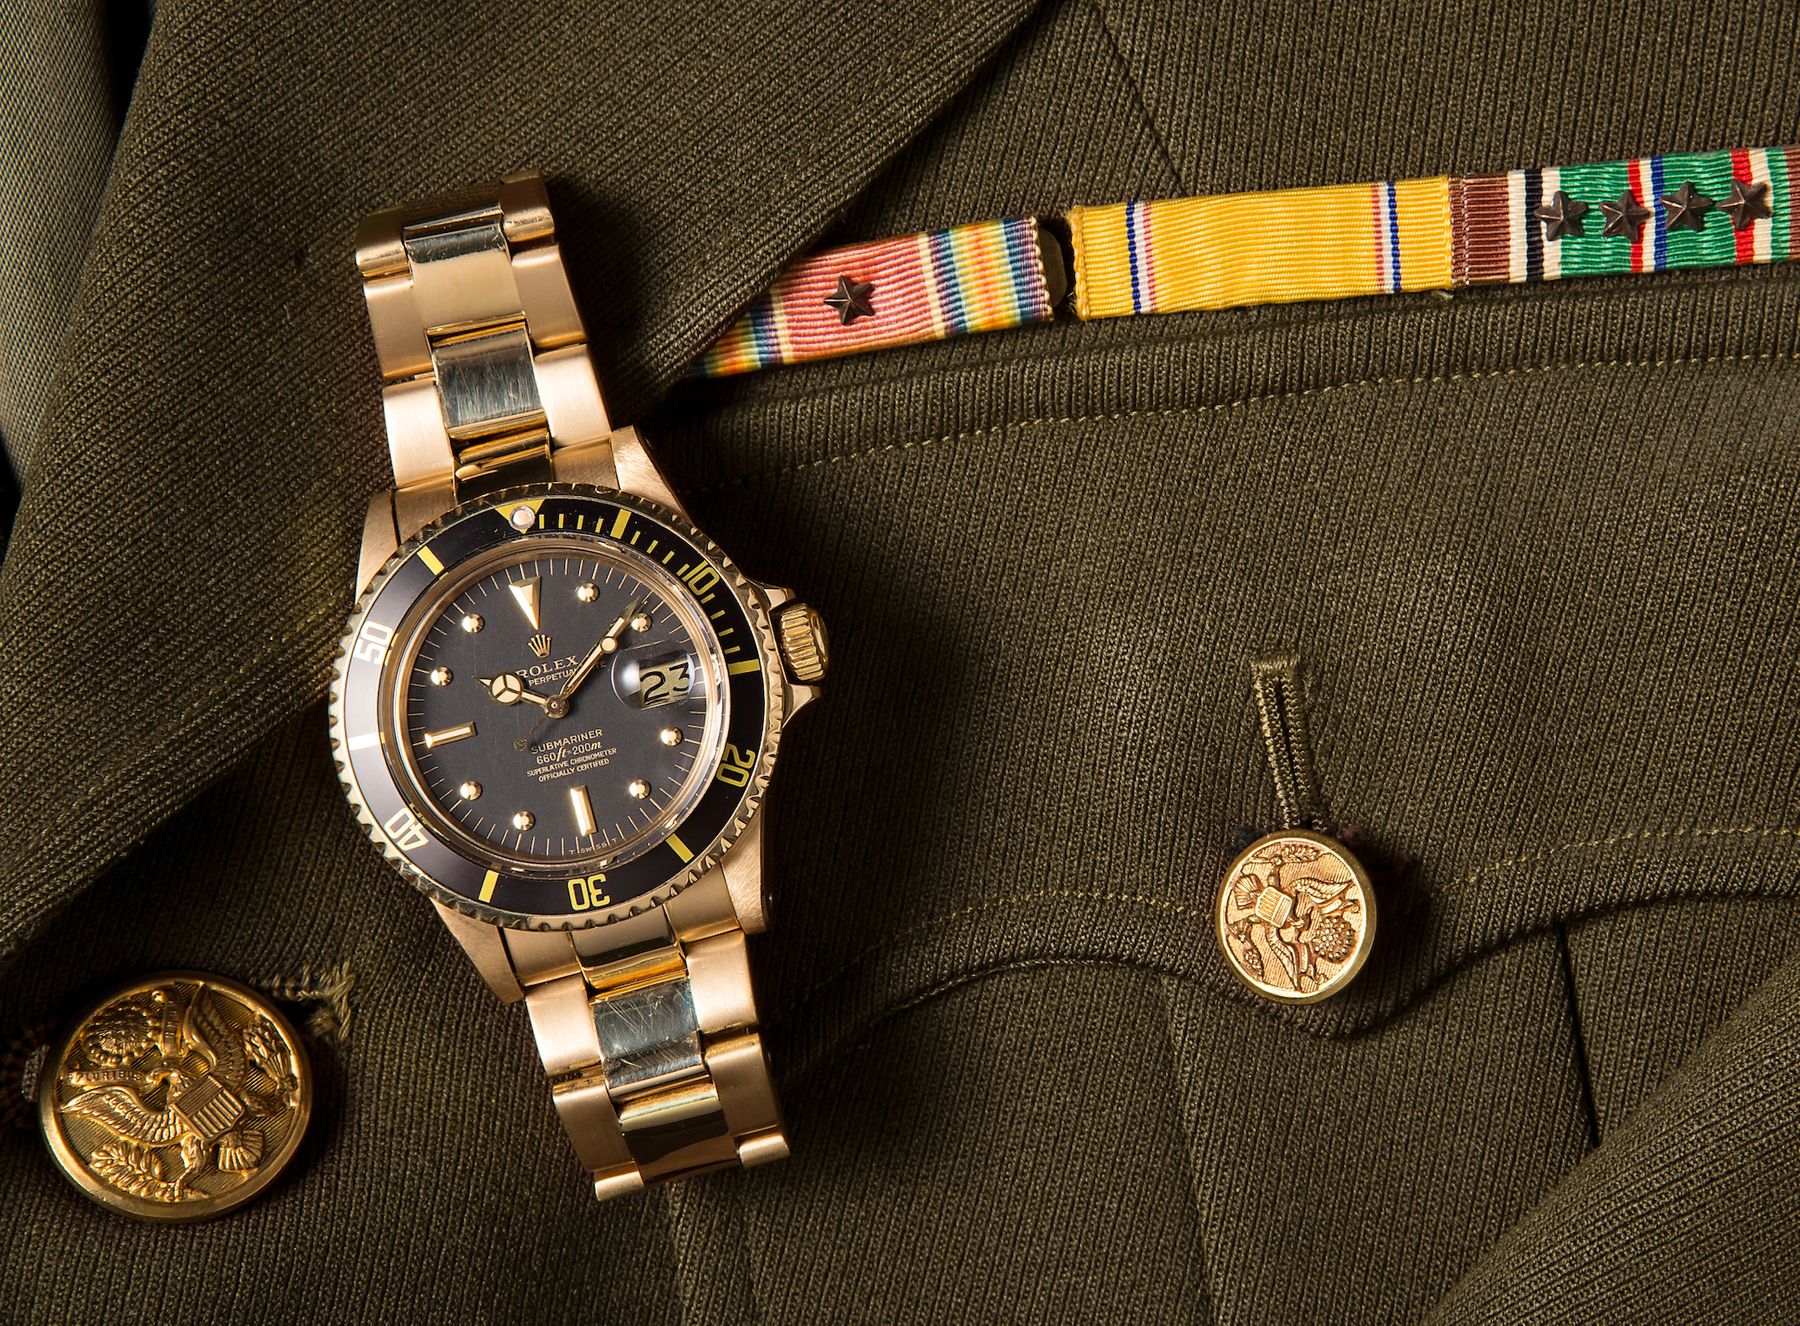 Merchandiser Tilmeld privilegeret Rolex Military Watches: Rolex and the Armed Forces - Bob's Watches